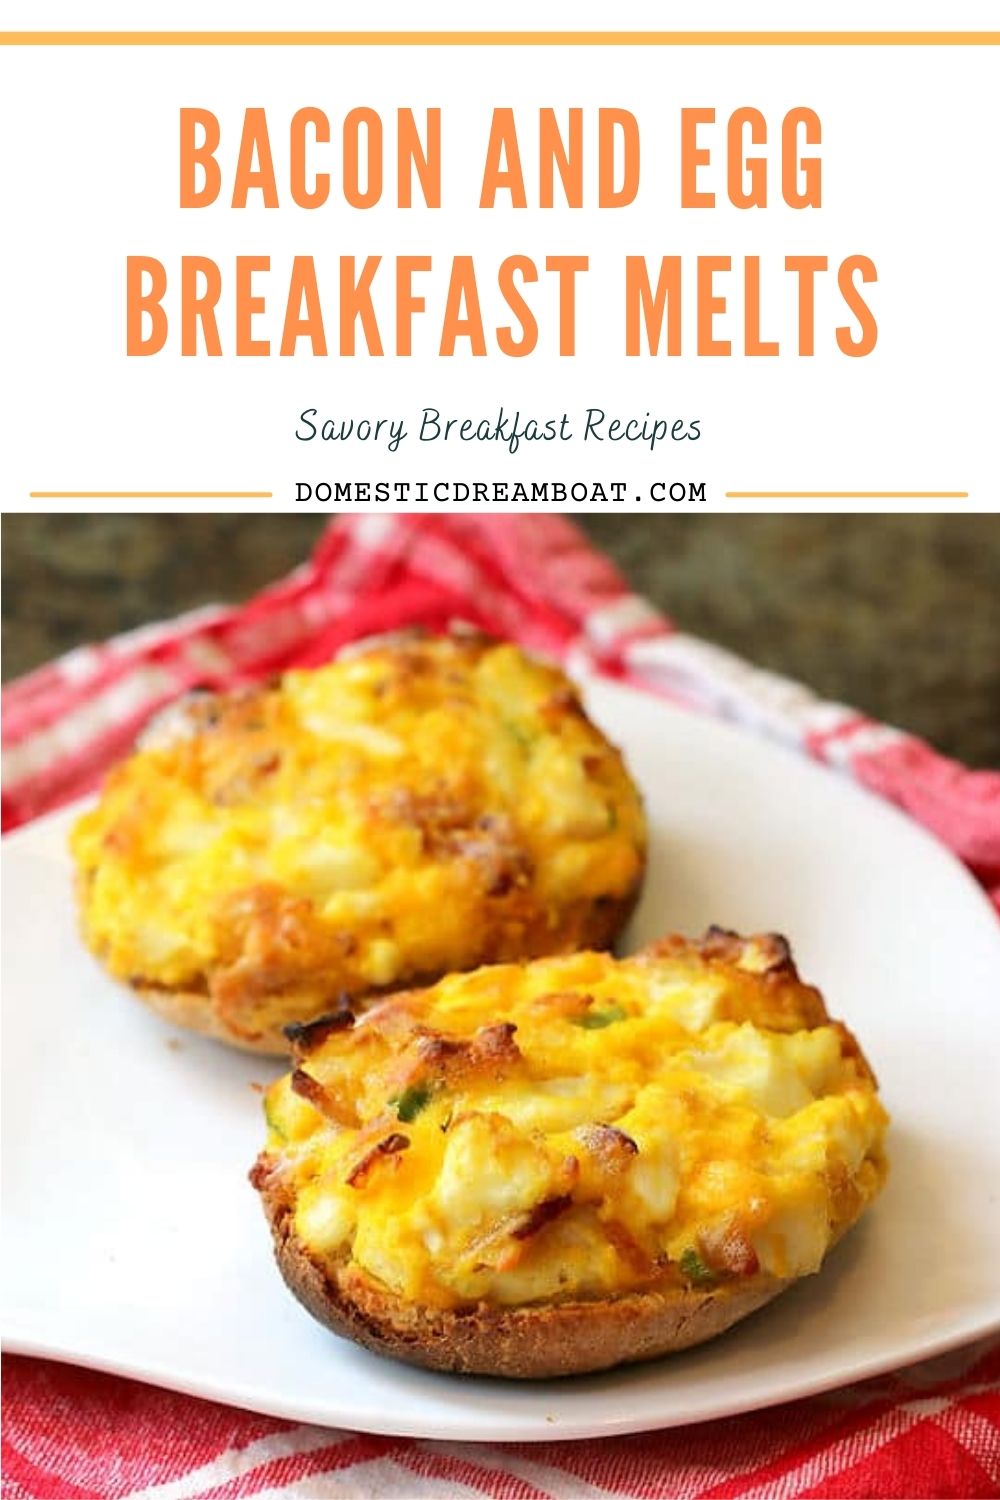 Bacon and Egg Breakfast Melts